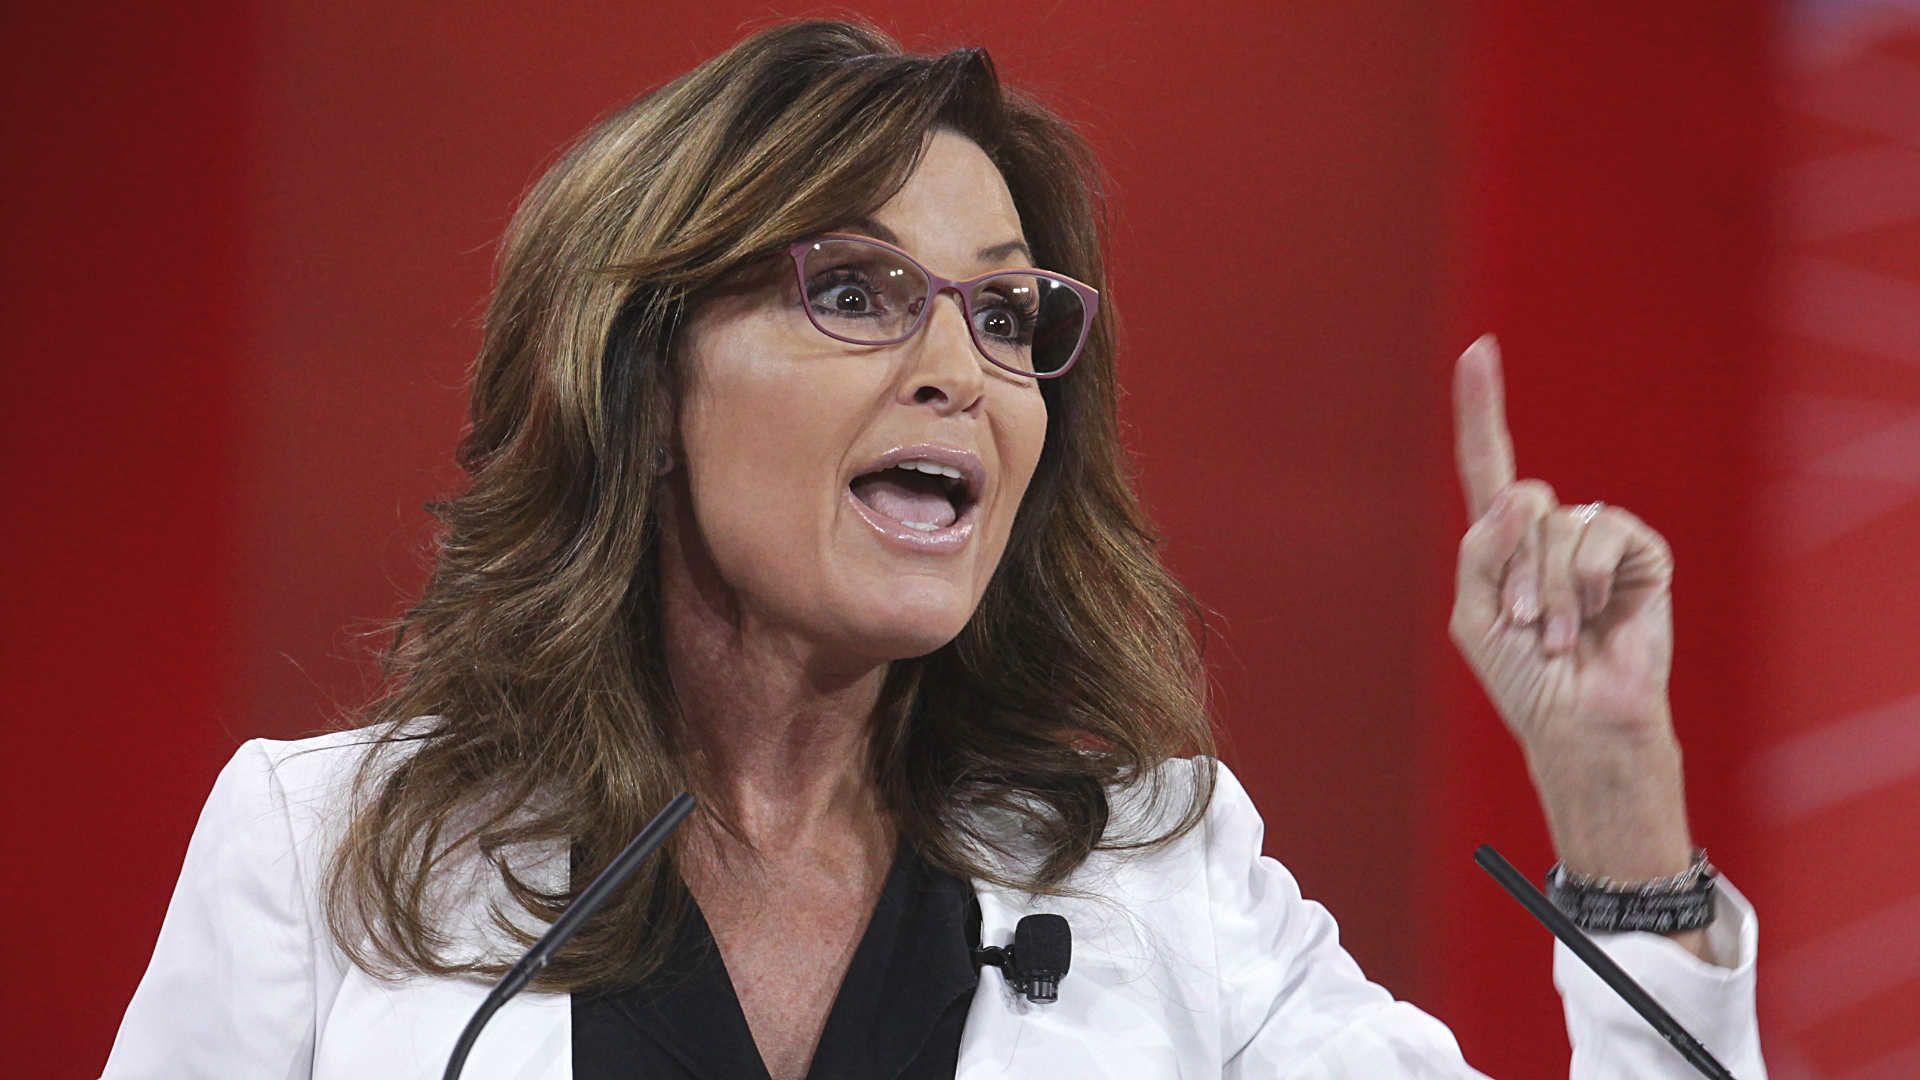 Sarah Palin defends Curt Schilling, blasts ESPN for buying into